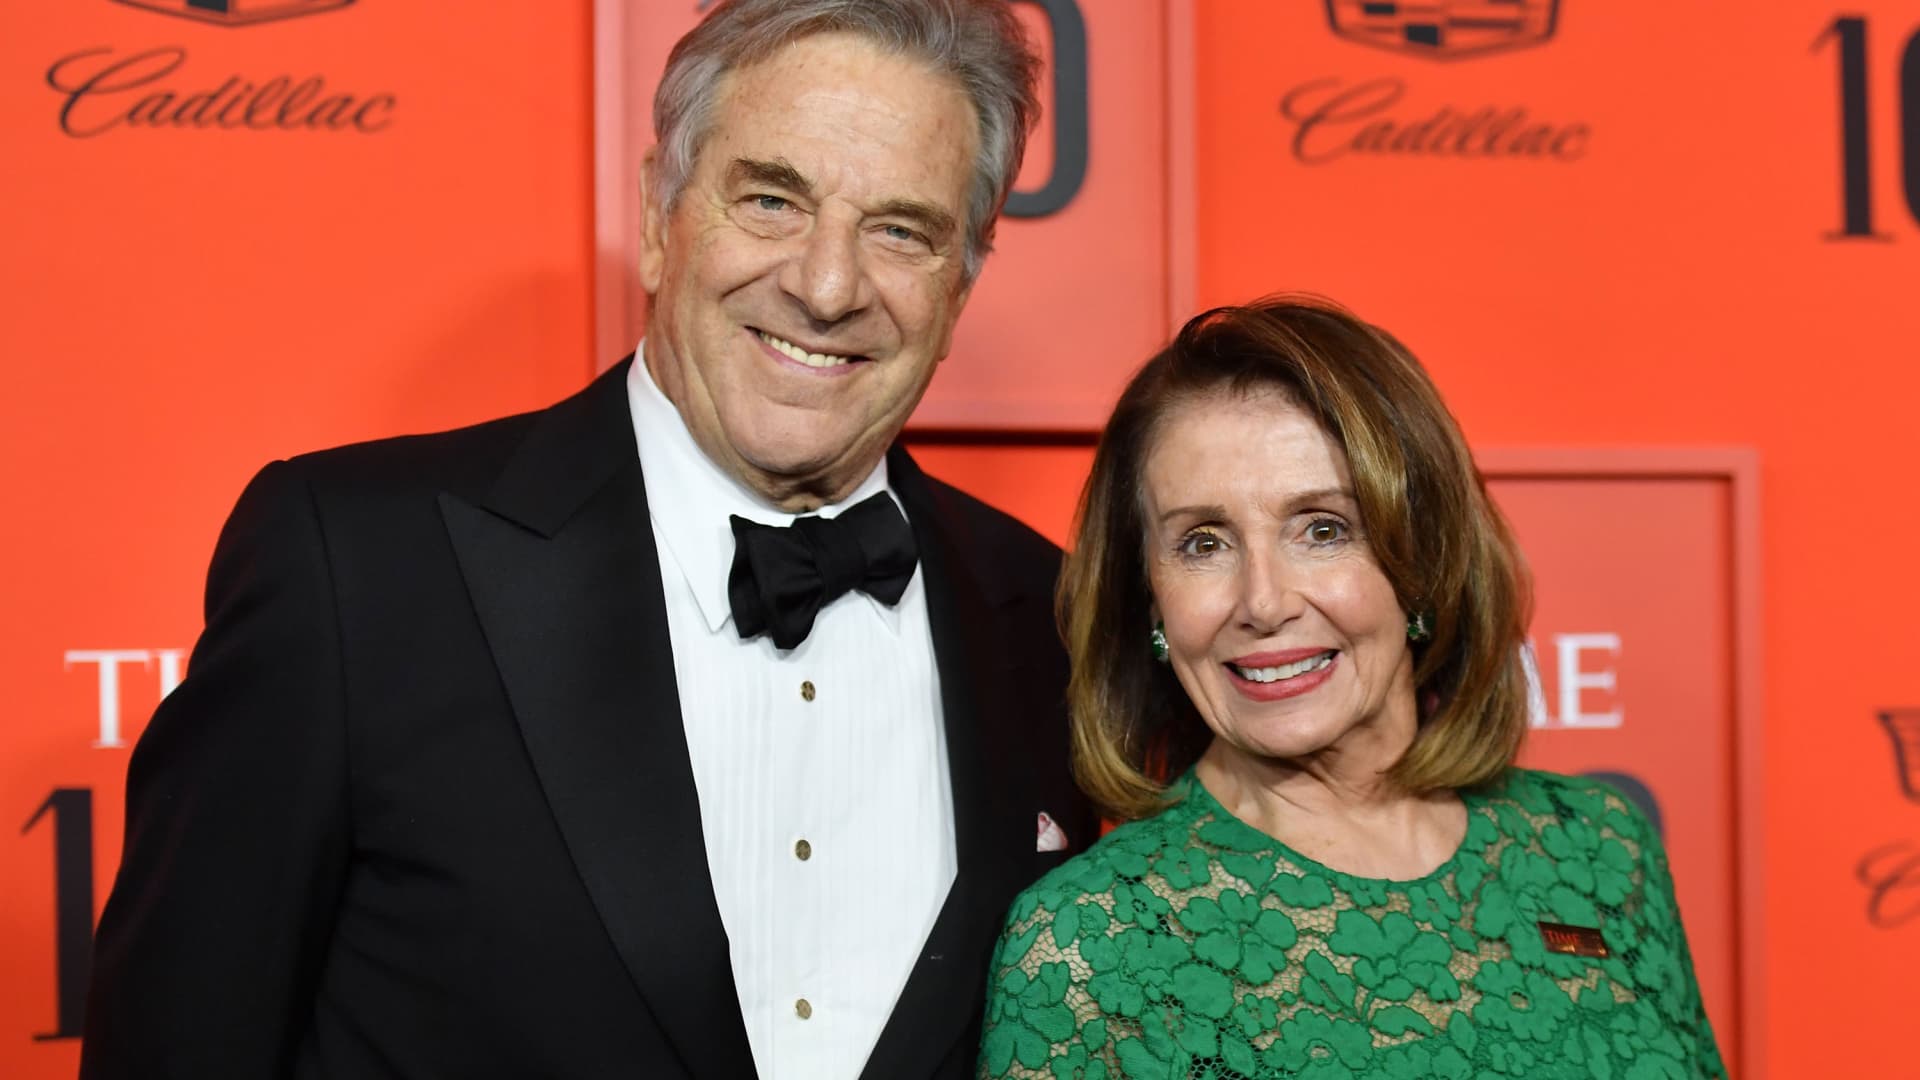 members-of-congress-express-support-for-paul-pelosi-following-violent-attack